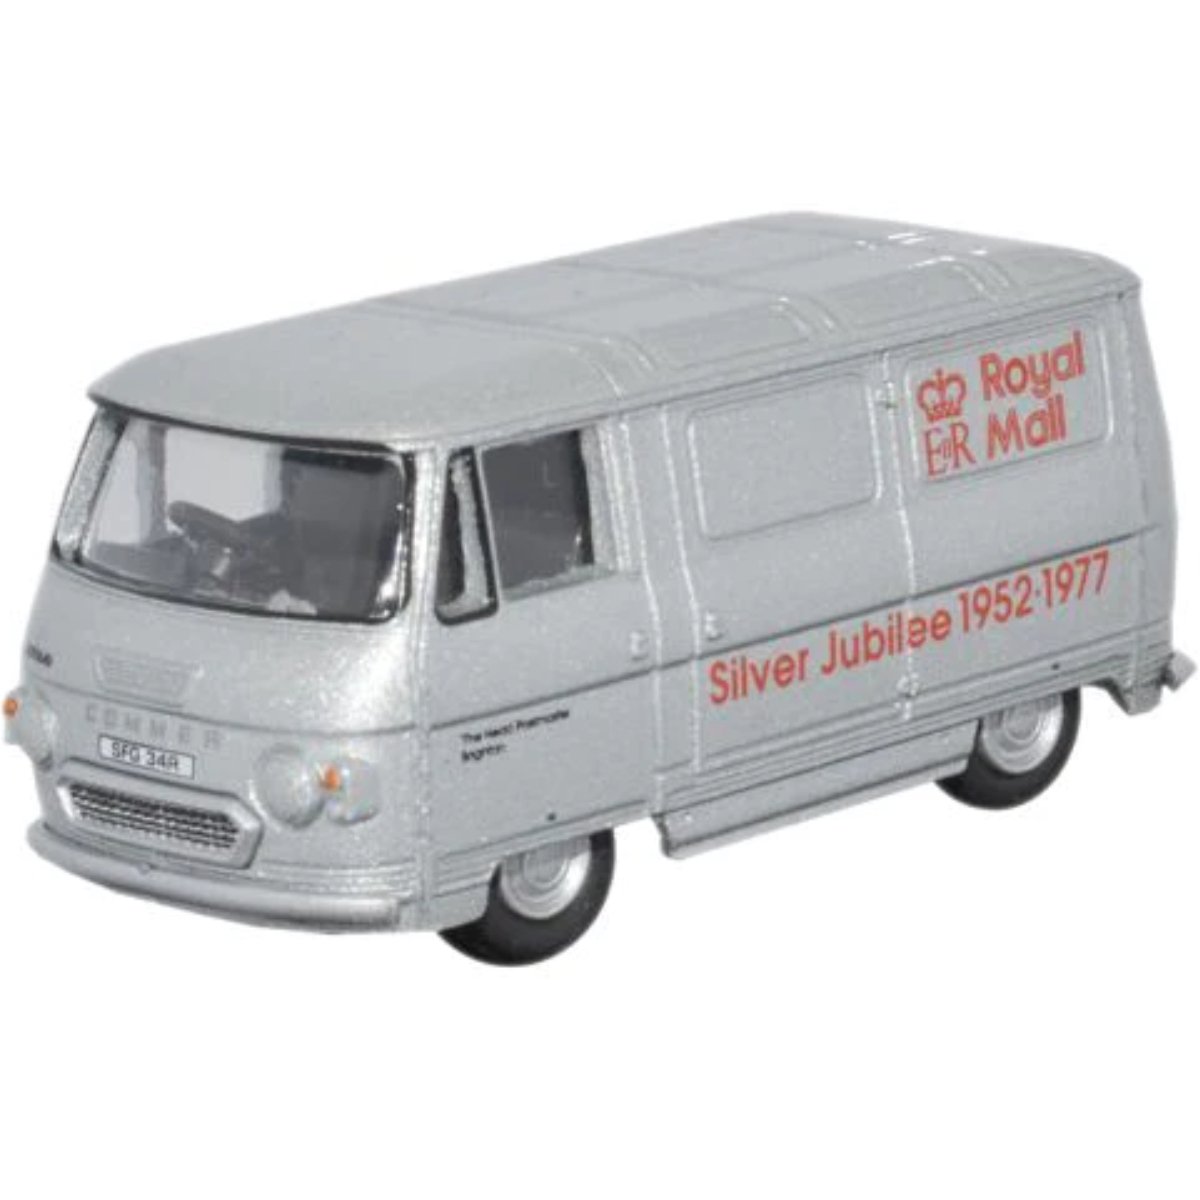 Oxford Diecast 76PB003 Commer PB Royal Mail Silver Jubilee - Phillips Hobbies